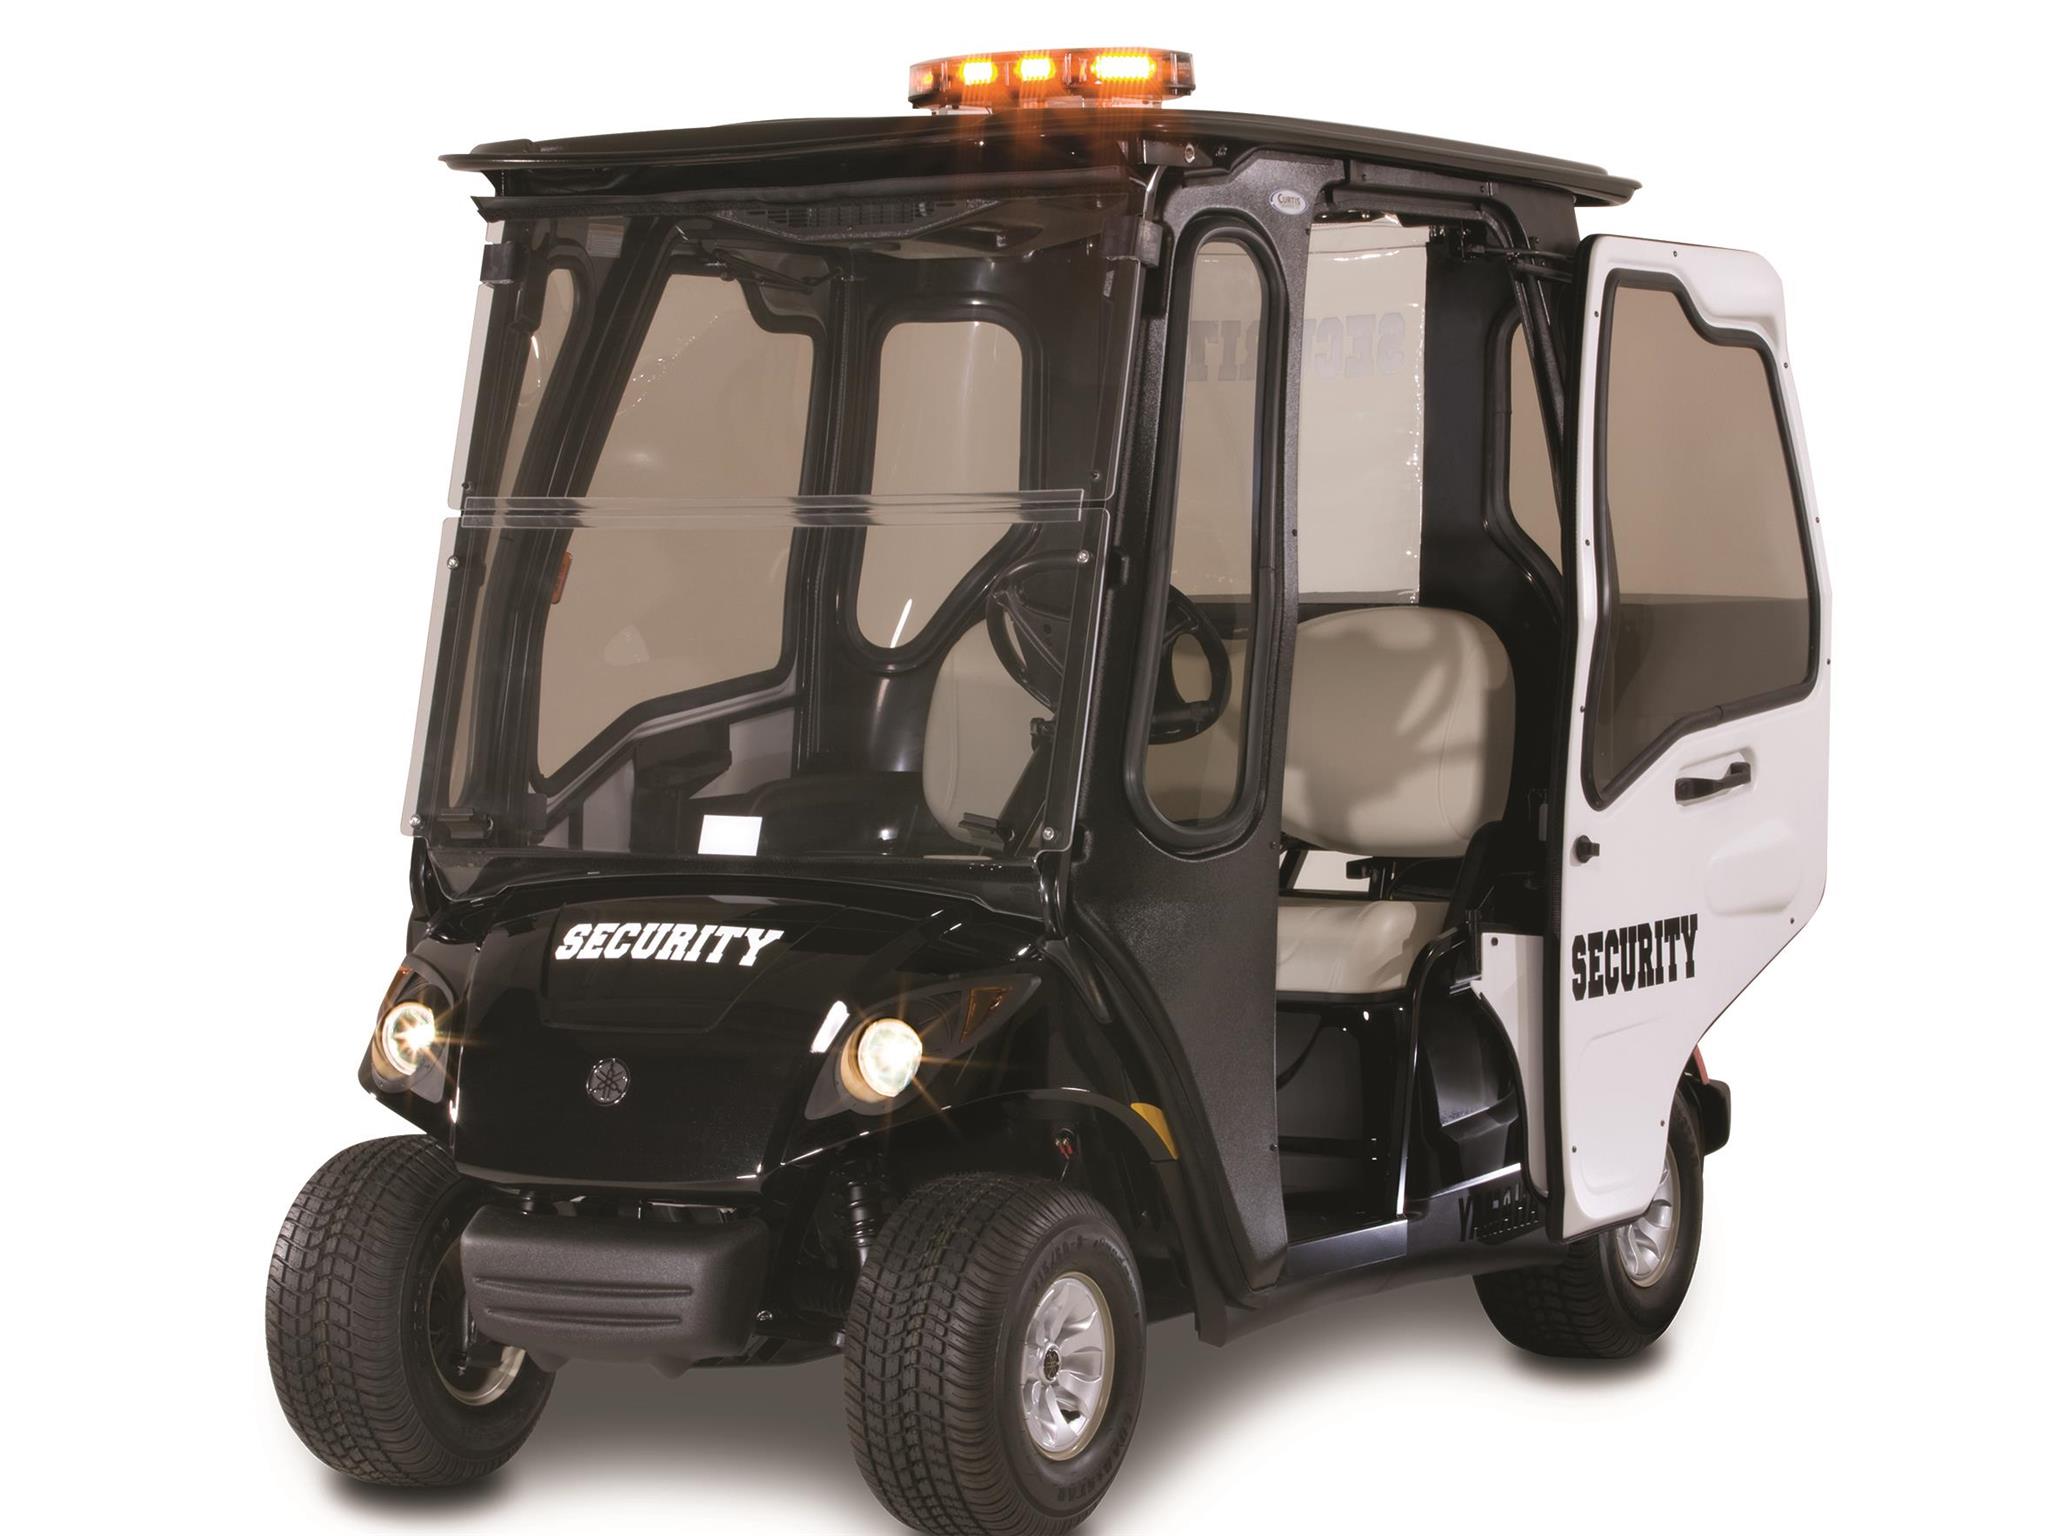 Image result for security golf cart